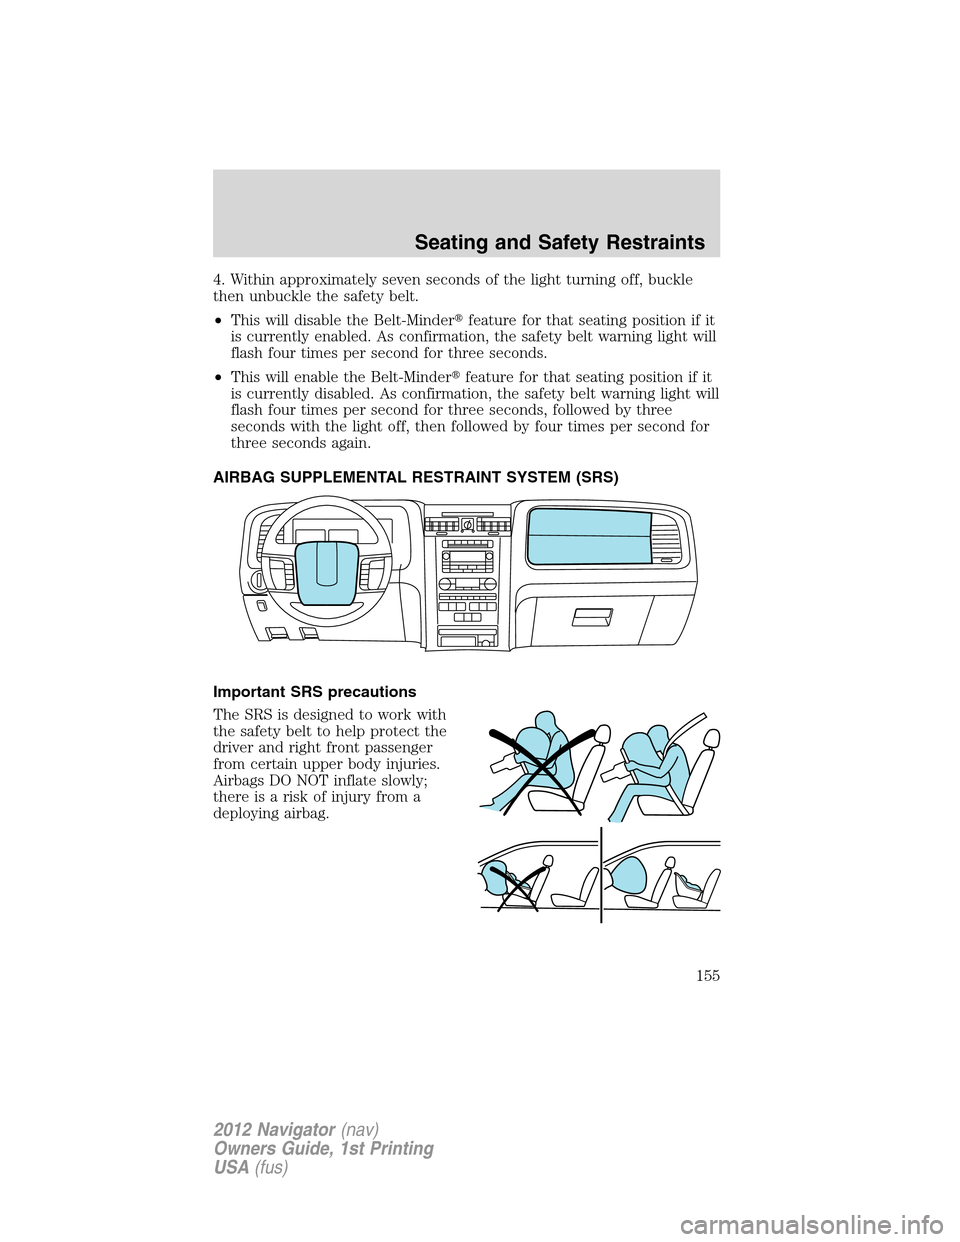 LINCOLN NAVIGATOR 2012  Navigation Manual 4. Within approximately seven seconds of the light turning off, buckle
then unbuckle the safety belt.
•This will disable the Belt-Minderfeature for that seating position if it
is currently enabled.